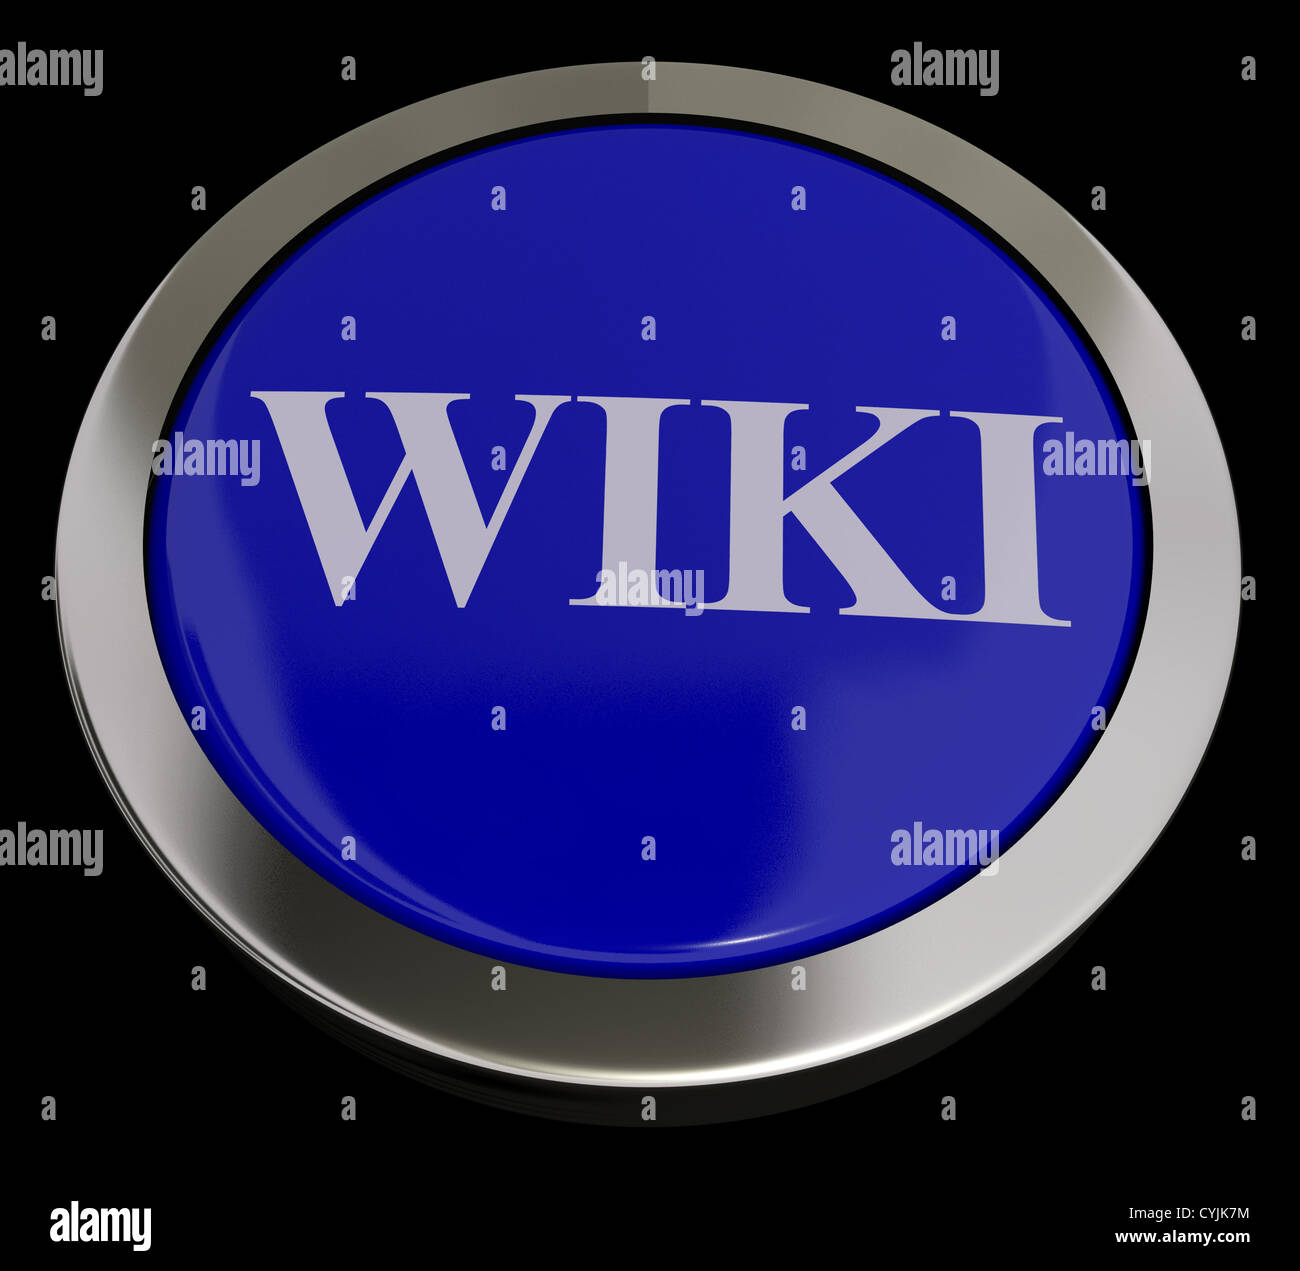 Wiki Button For Online Information Or Encyclopedias Stock Photo